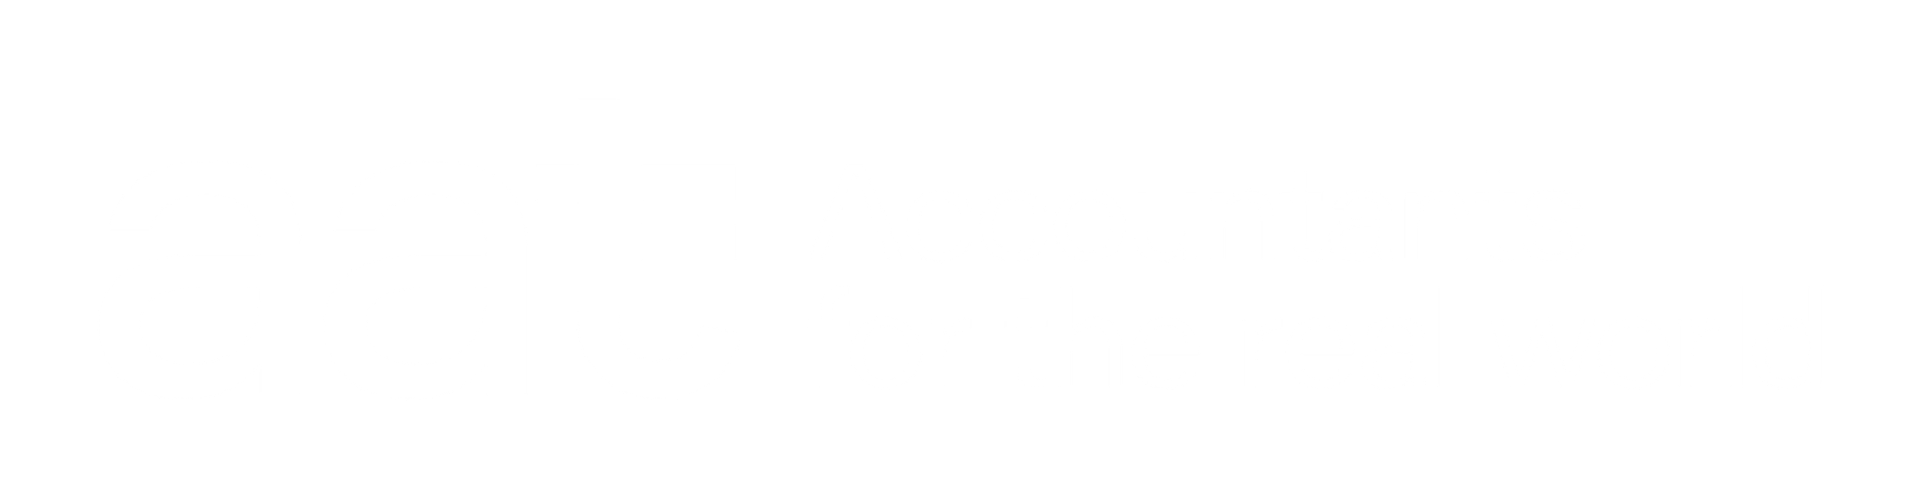 AAT - Accountants for the real world